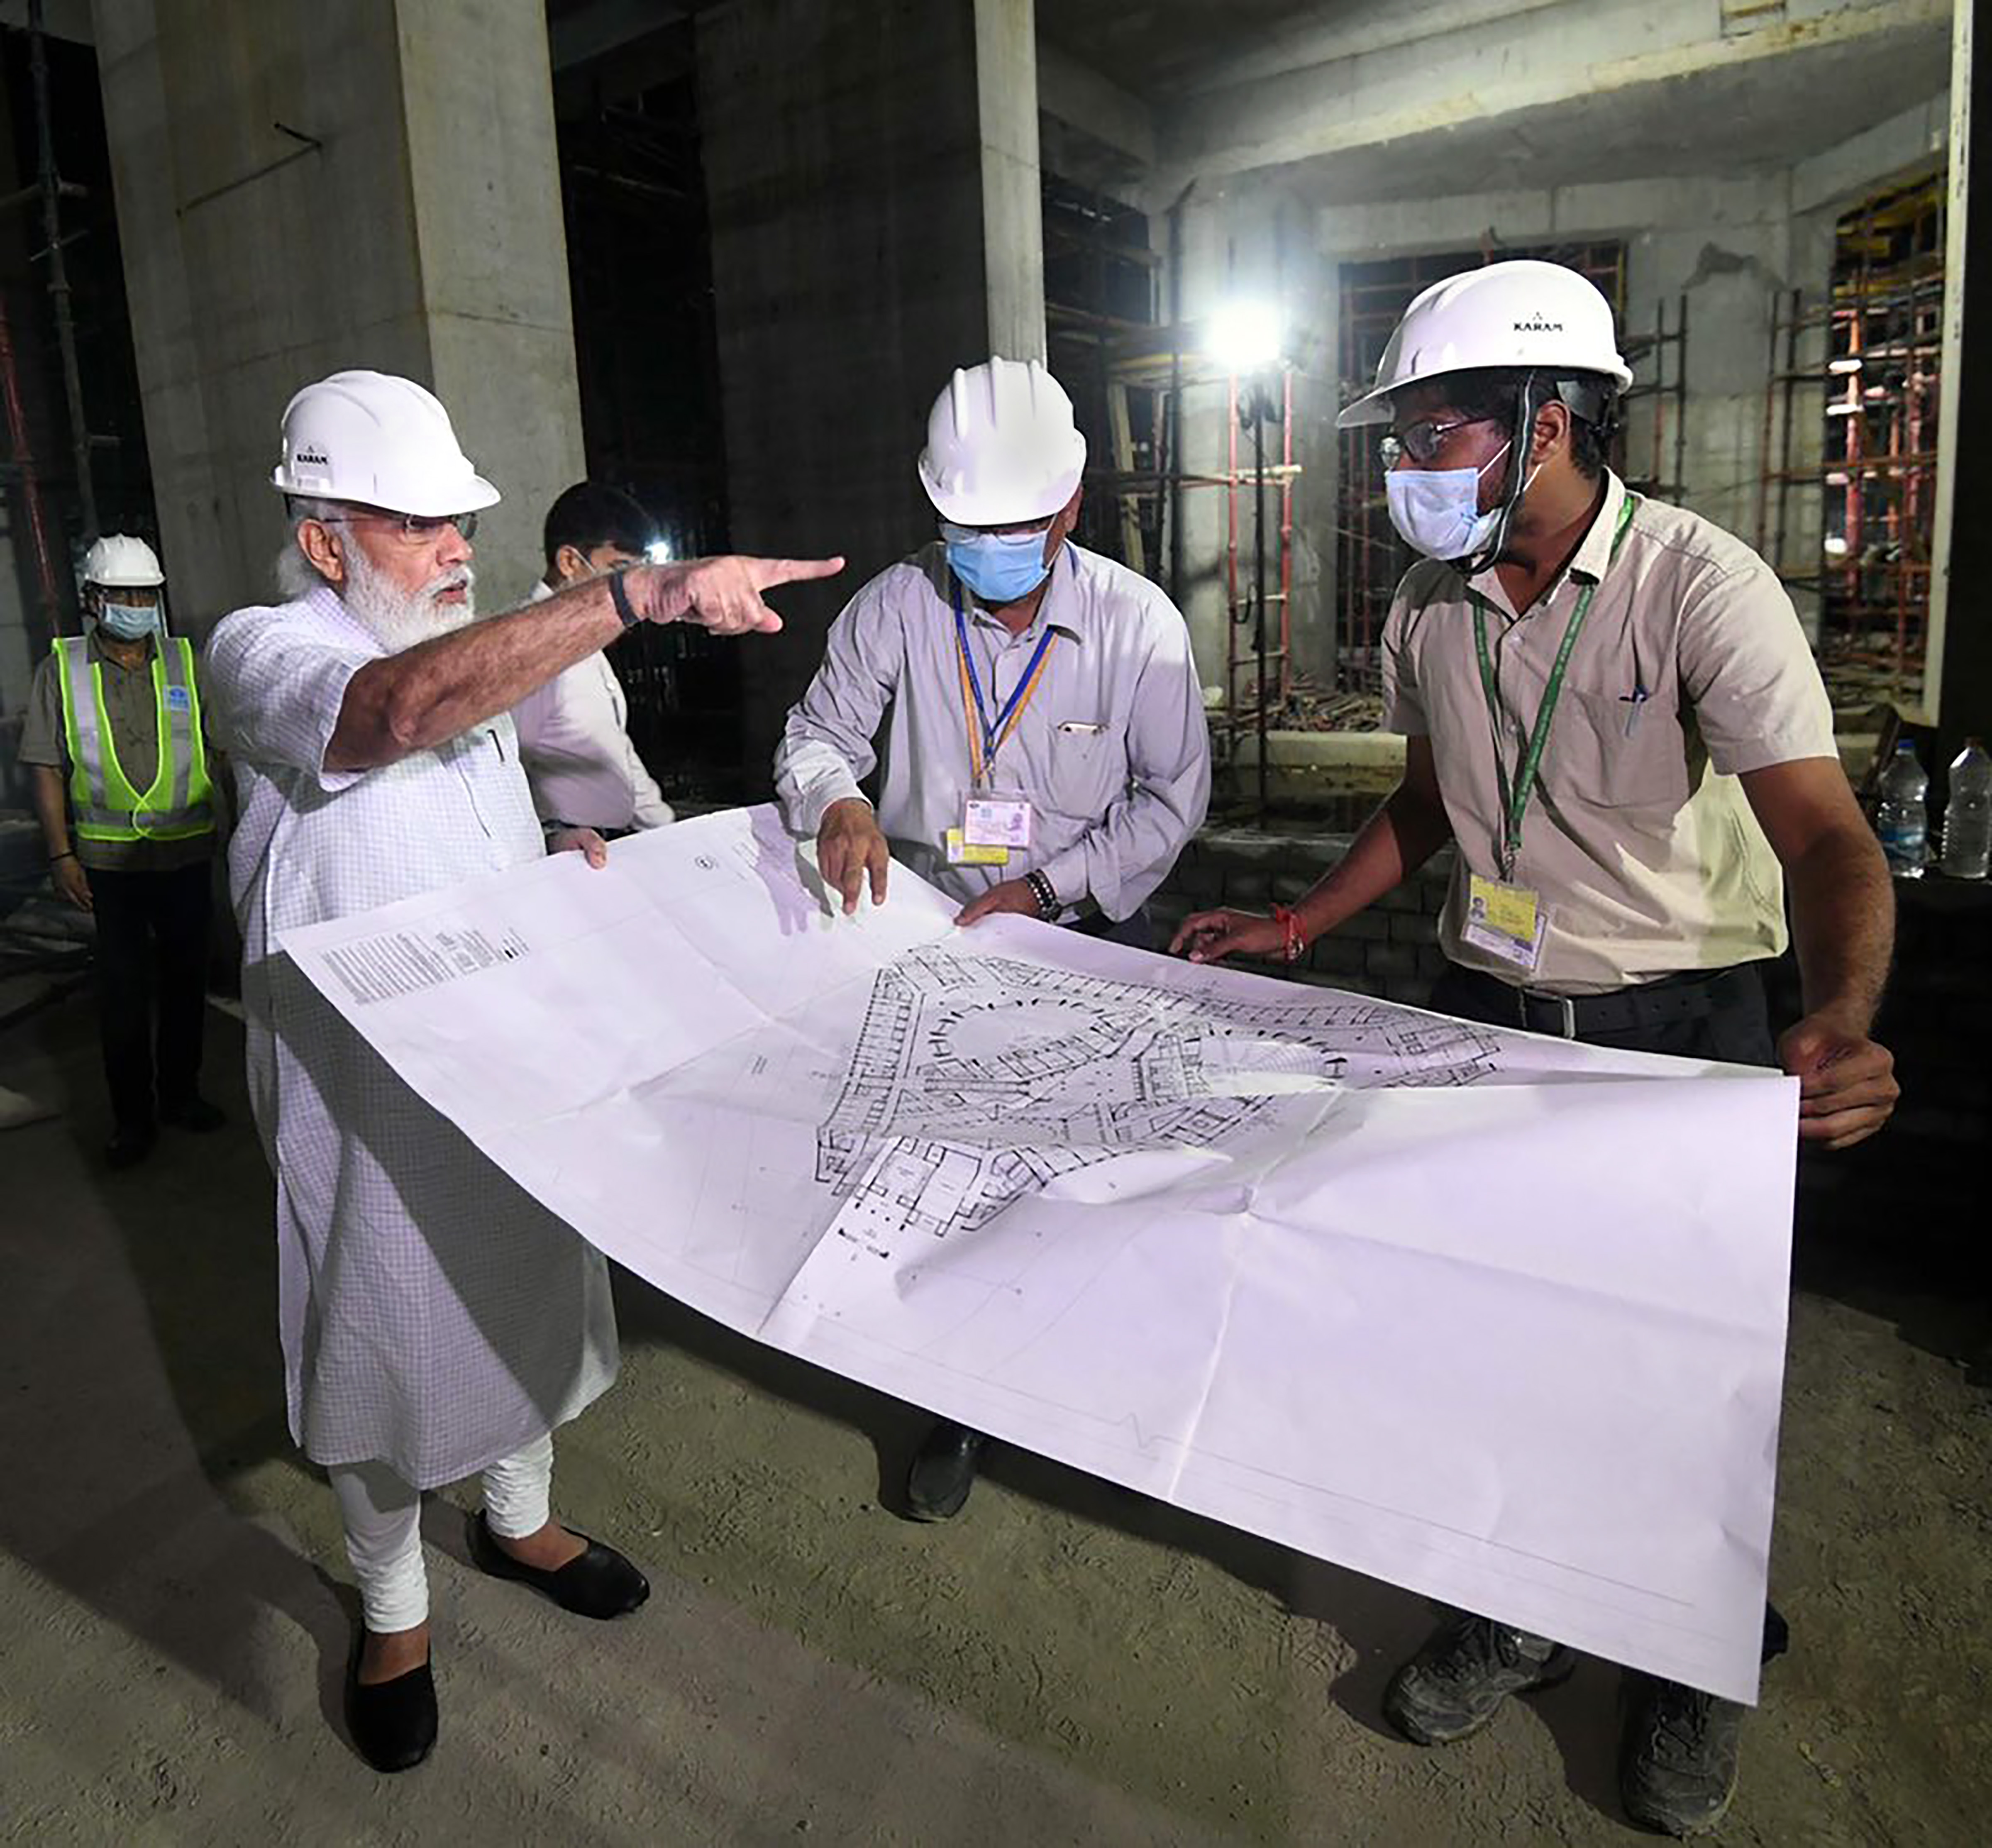 The new Parliament building is expected to cost around ₹971 crore, and till the beginning of August a total of ₹238 crore has been spent on it(PTI)